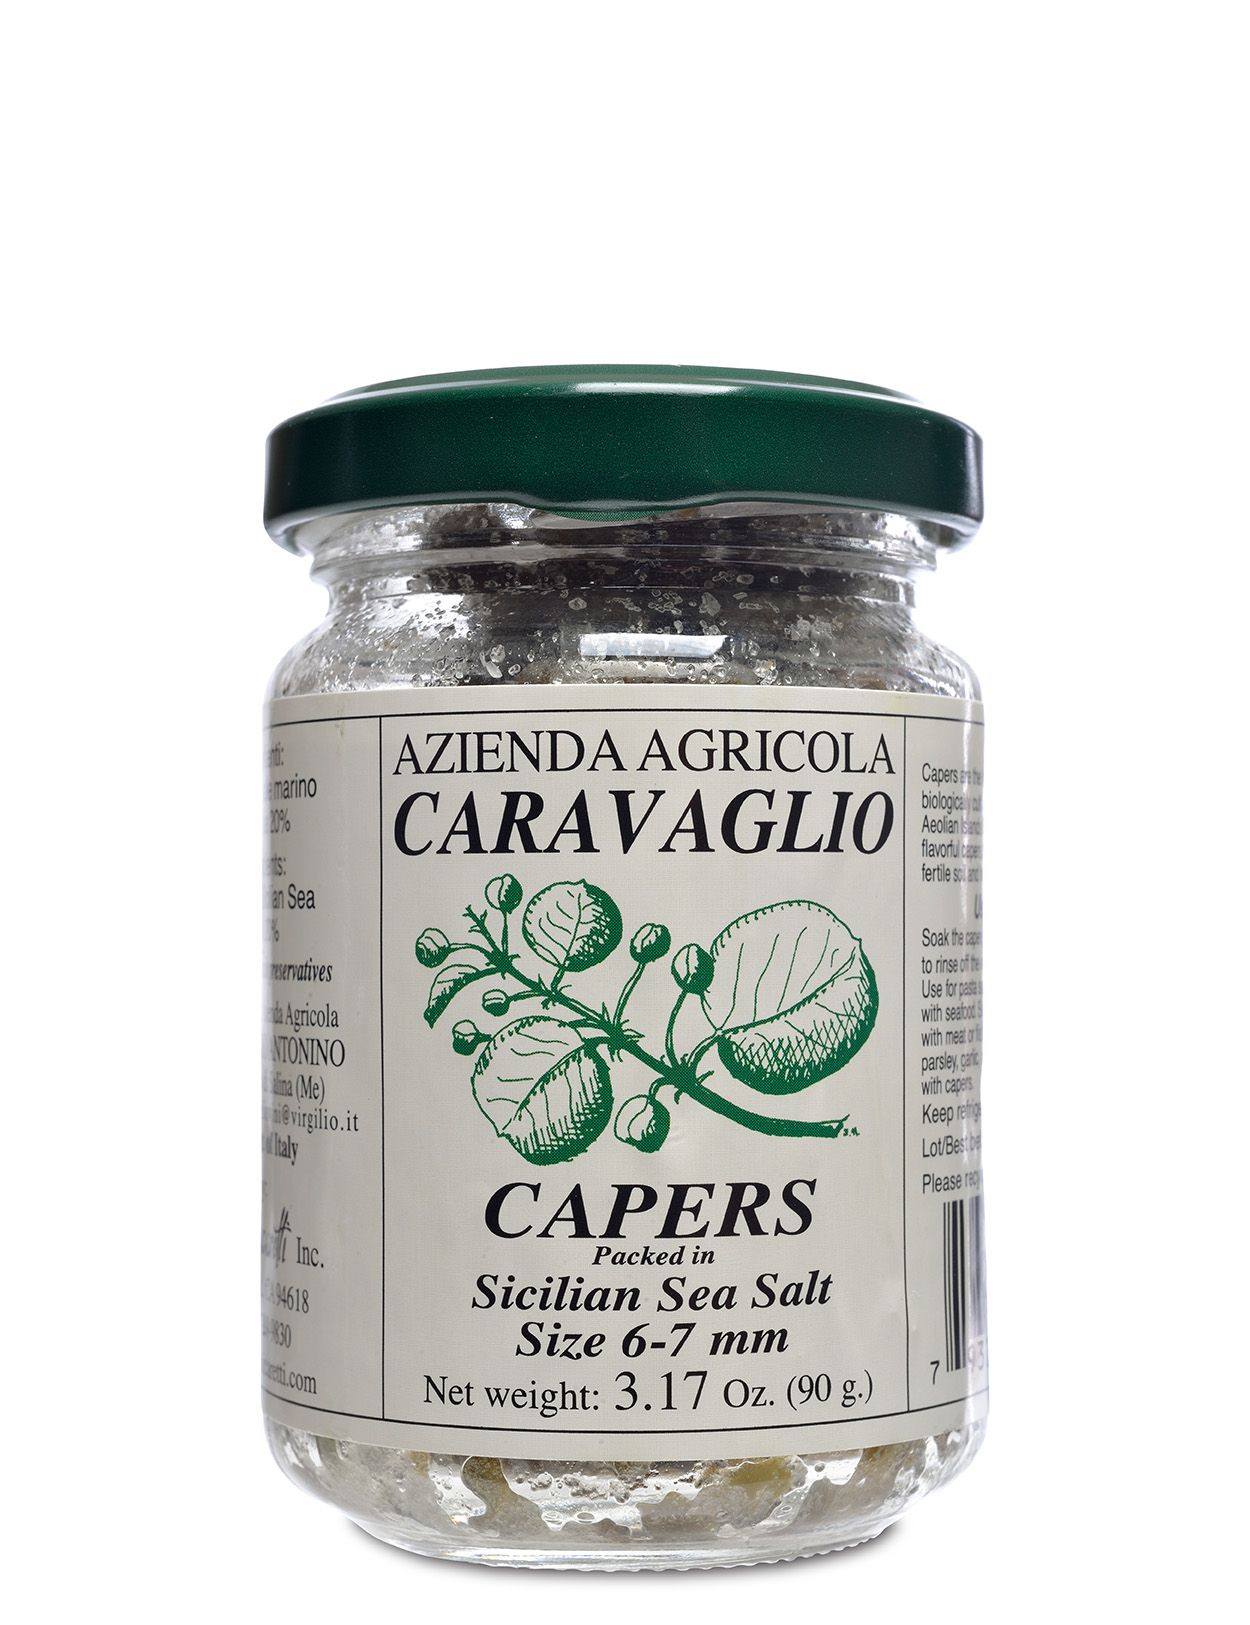 Sicilian Salted Capers from Salina (caliber 6-7 mm)